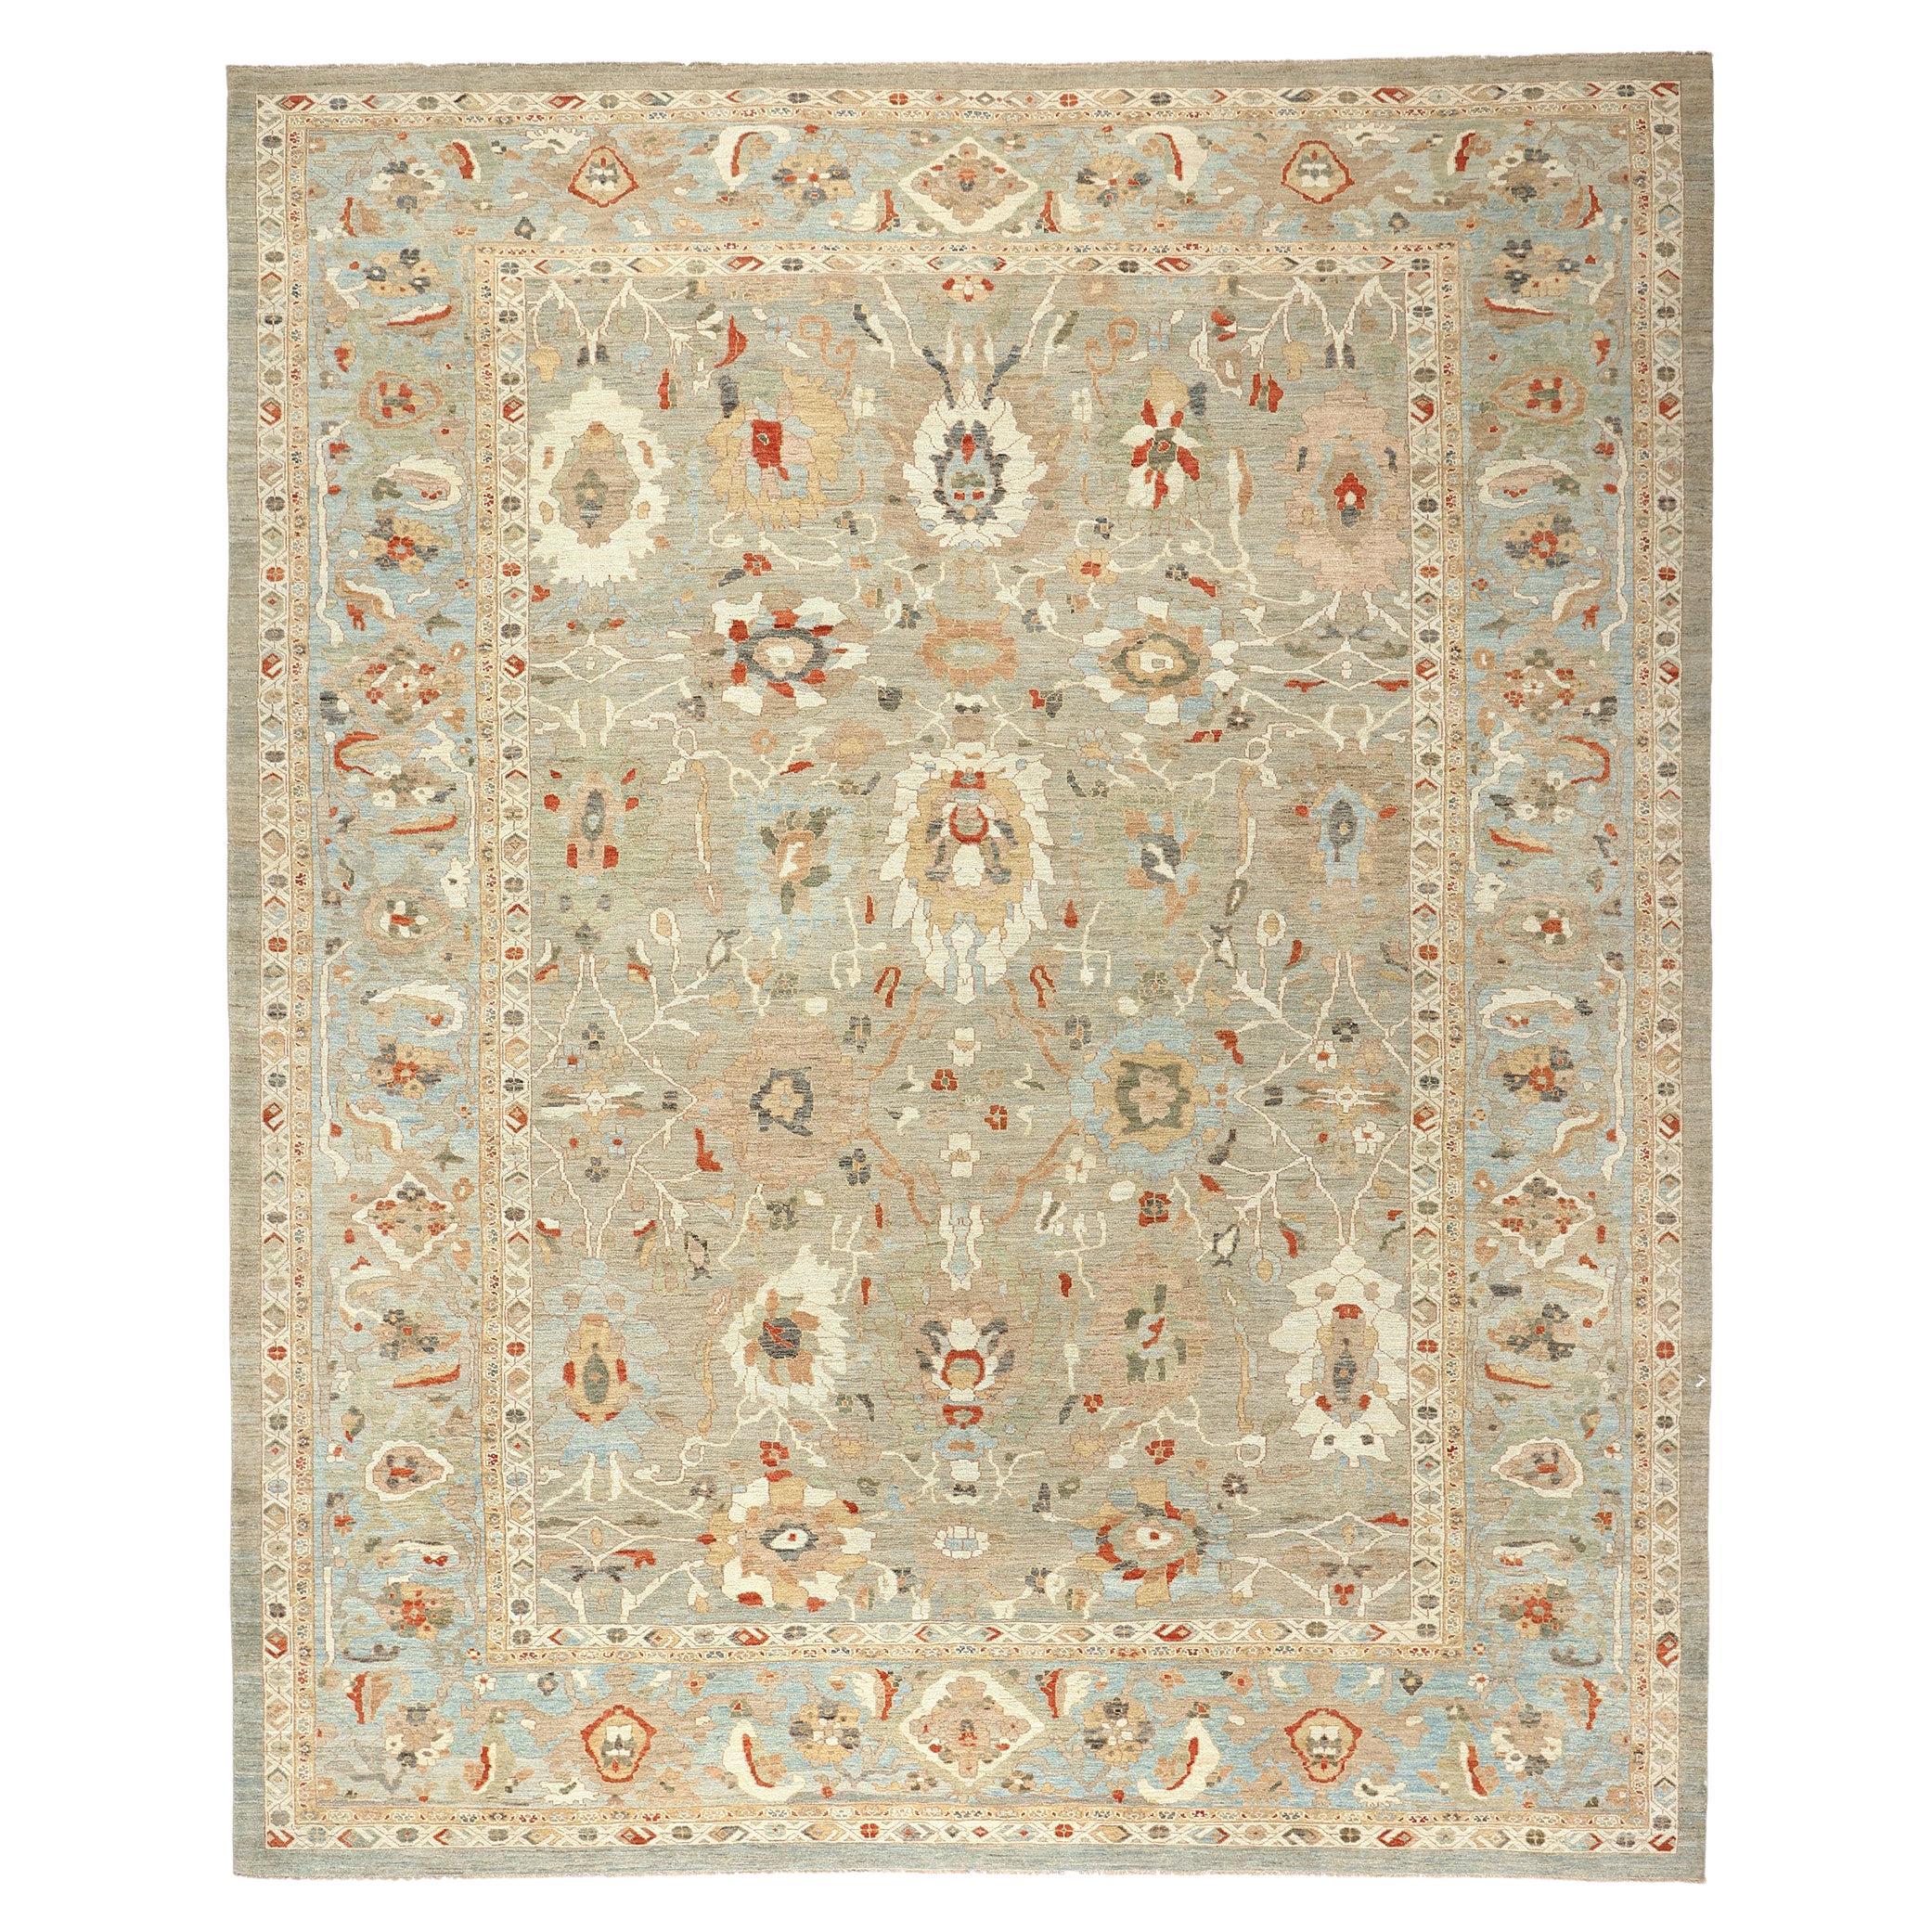 Contemporary Tan and Blue Persian Sultanabad Rug, 15'06 x 18'09